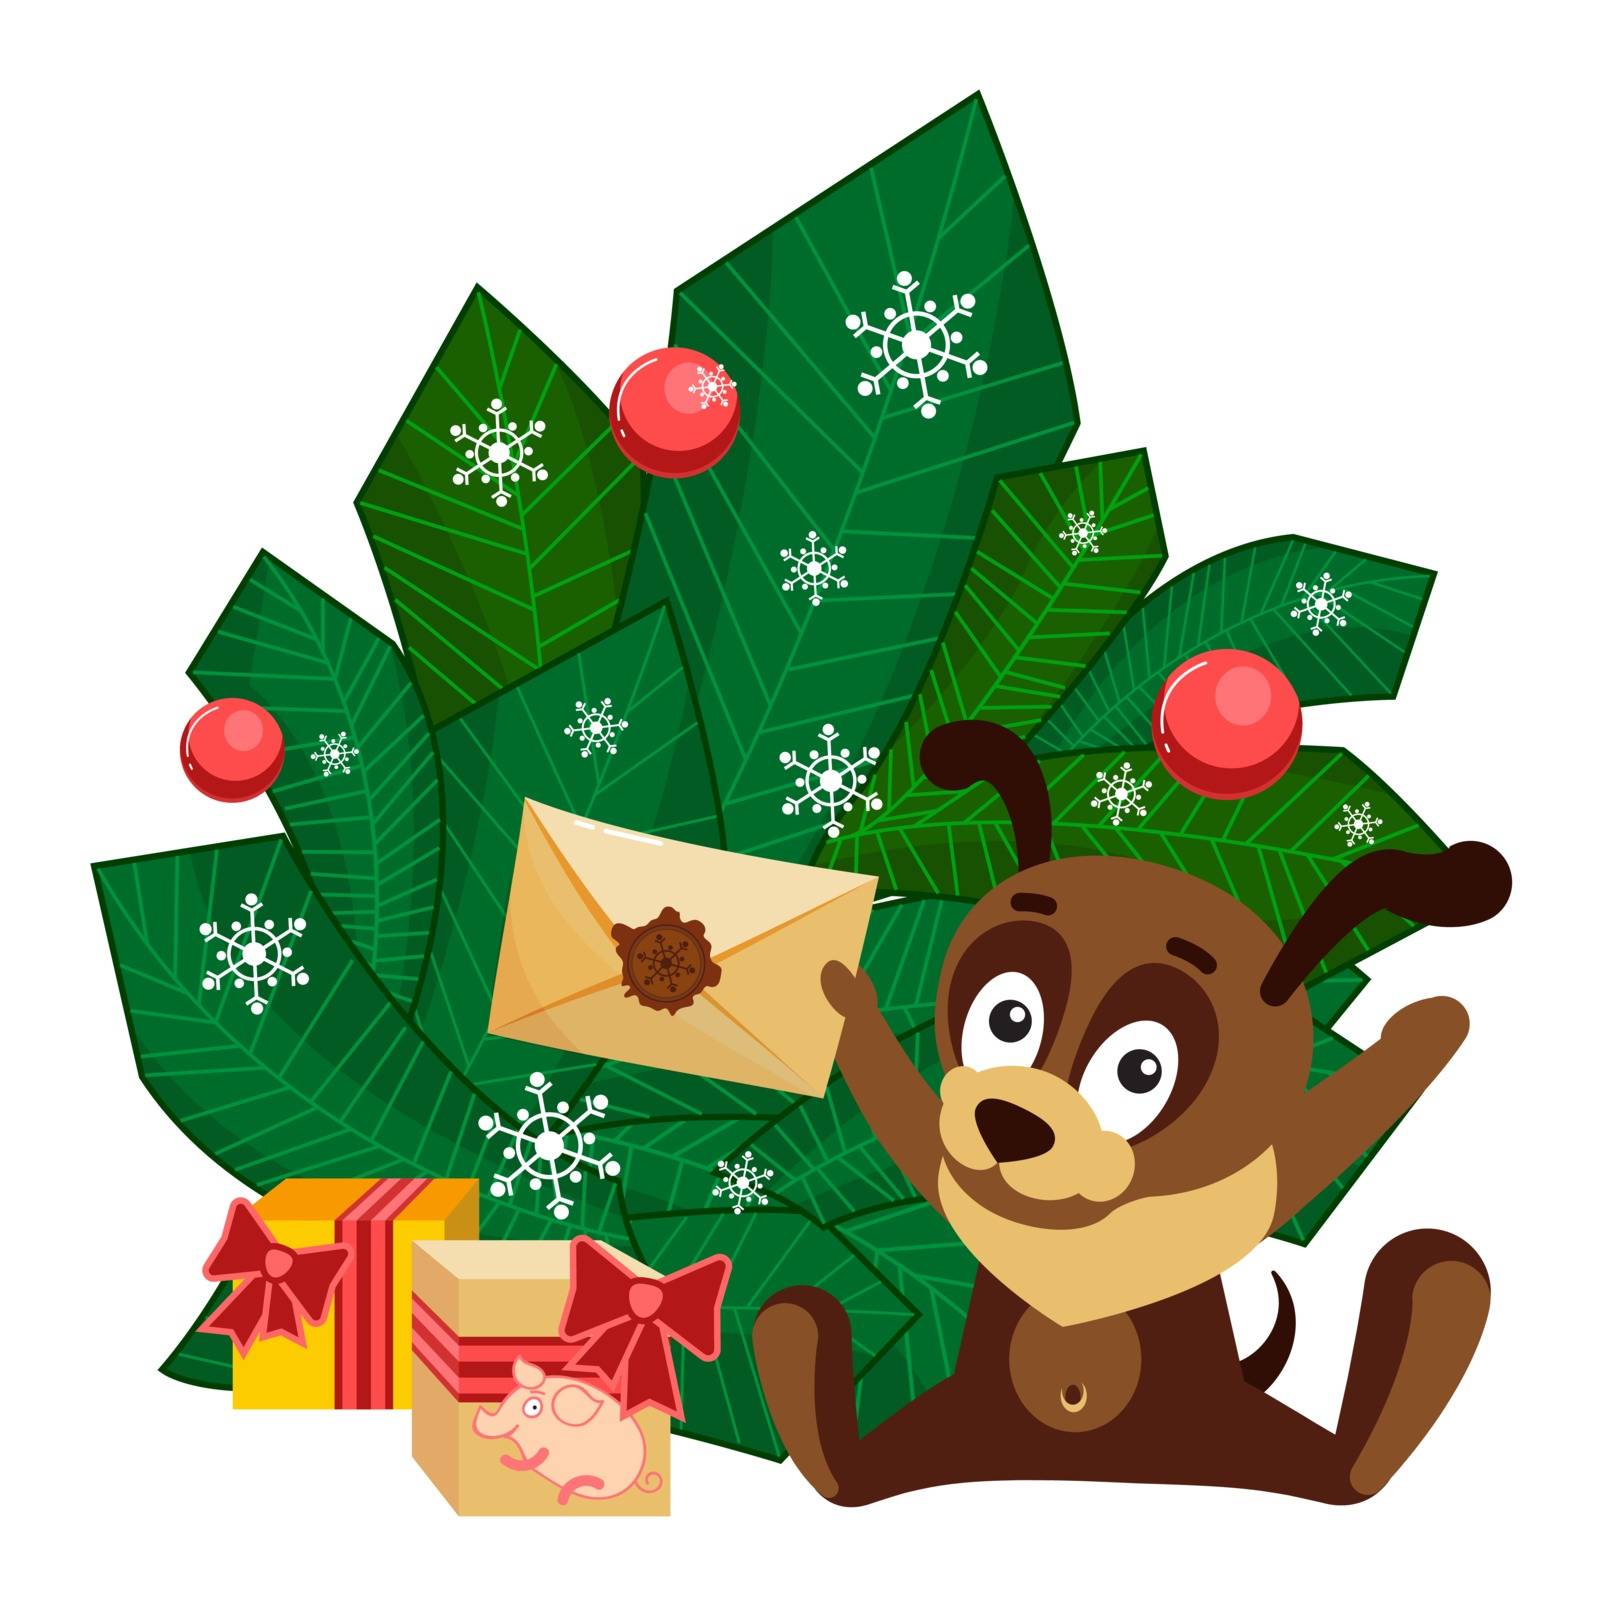 A puppy in a New Year cap sitting in front of branches with decorated balls and holding an envelope from Santa Claus. Christmas or New Year greeting card with characters for congratulations. A merry dog puppy enjoys letter from Santa Claus. Cartoon clip art with animals on chinese New Year. Isolated kids vector illustration on white background